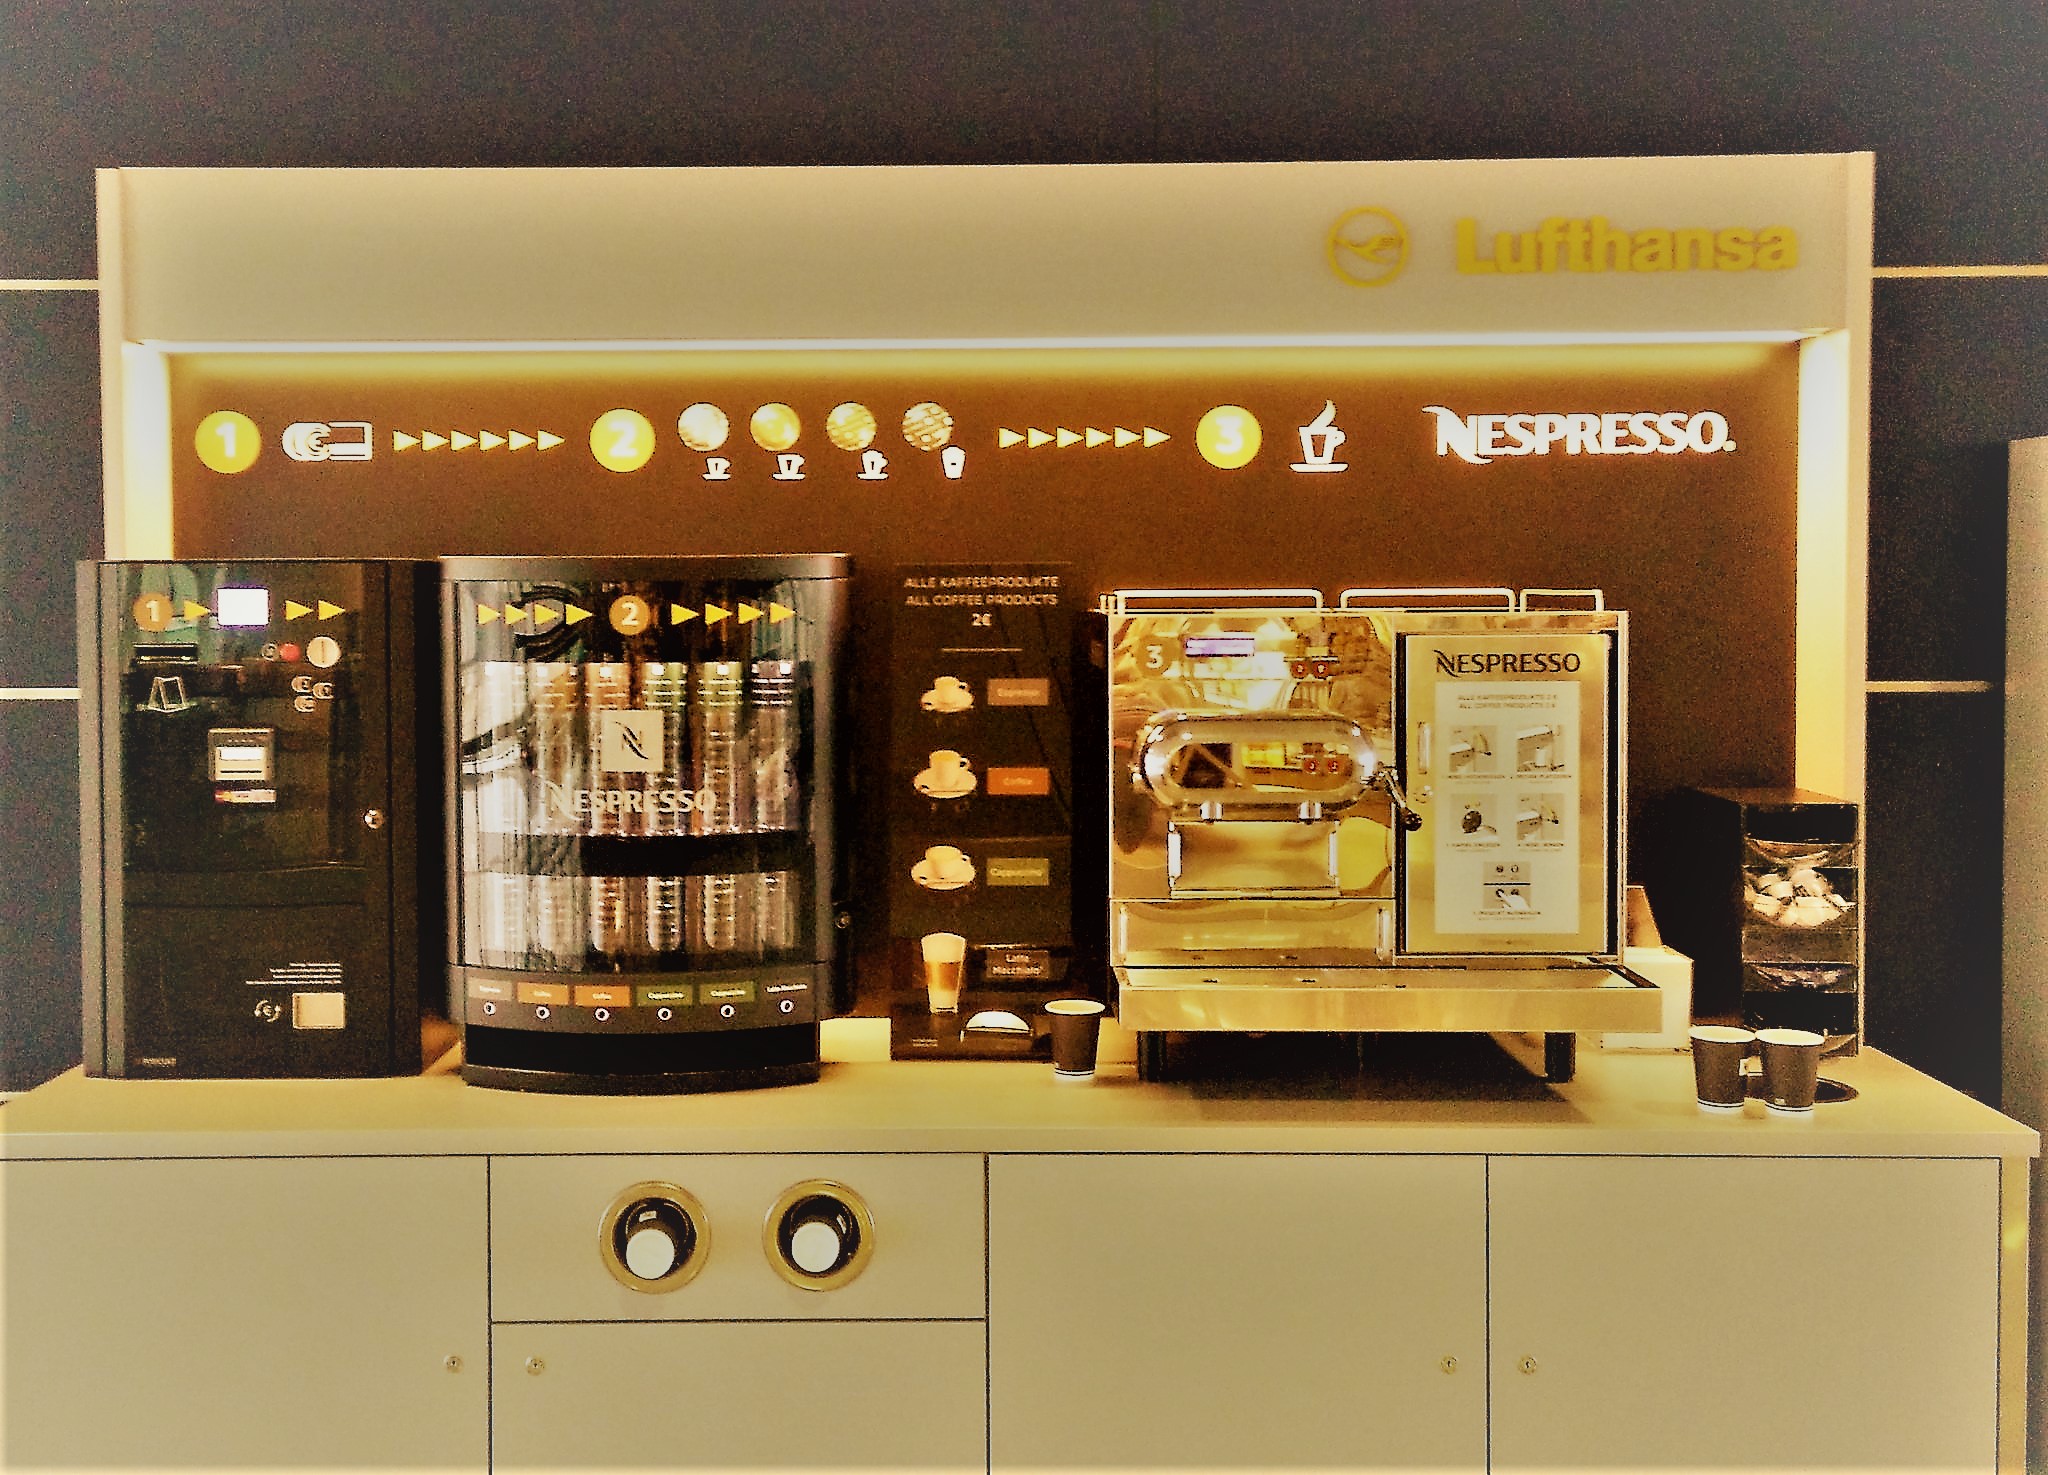 Lufthansa partners with Nespresso to offer passengers quality coffee at the gate